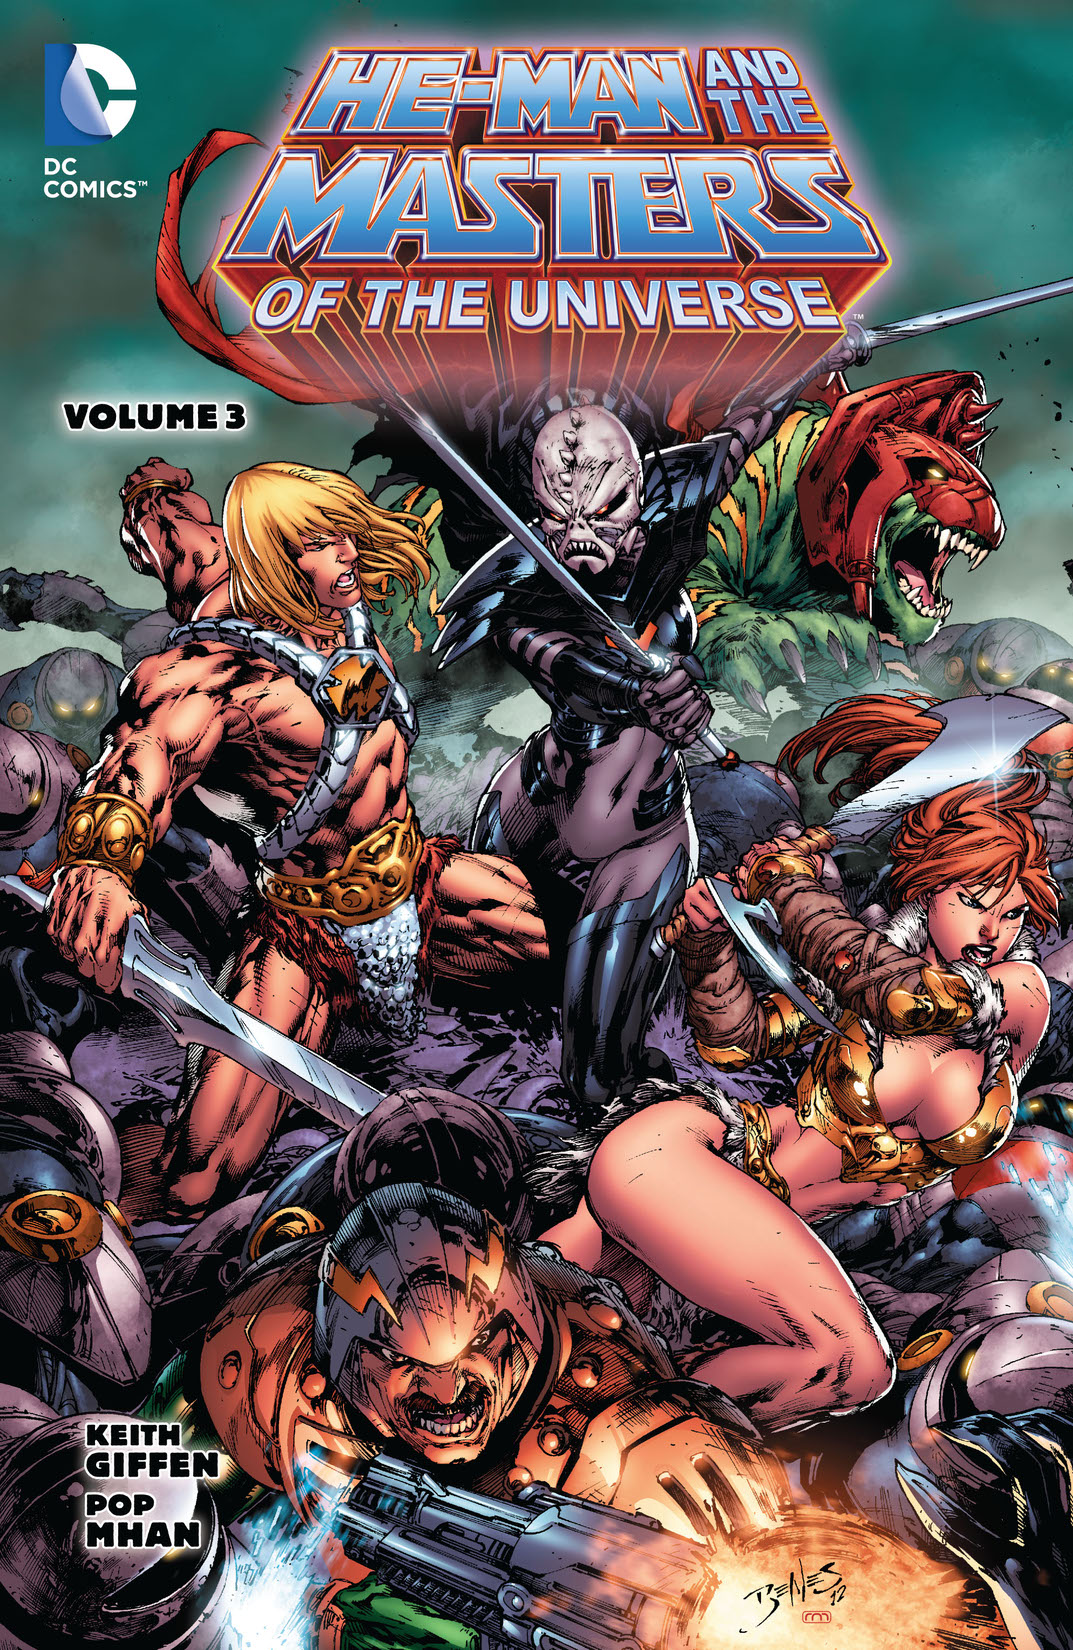 He-Man and the Masters of the Universe Vol. 3 preview images